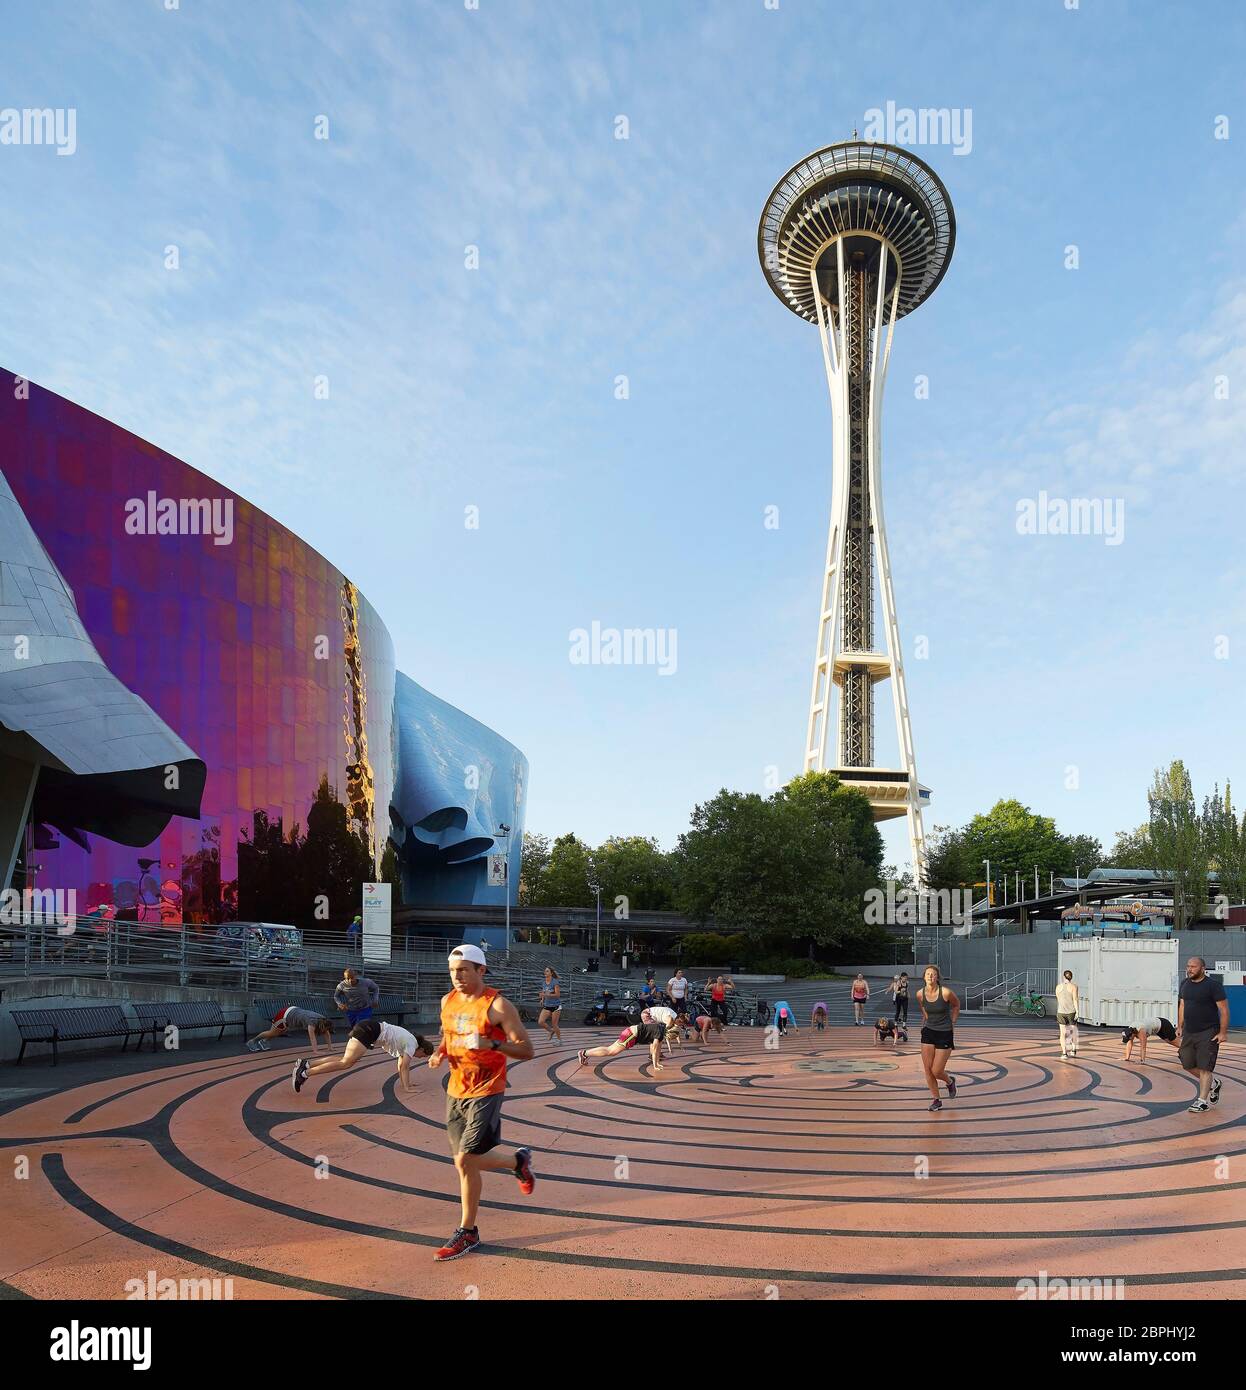 Play and training area next to Museum of Pop Culture. Space Needle, Seattle, United States. Architect: Olson Kundig, 2020. Stock Photo